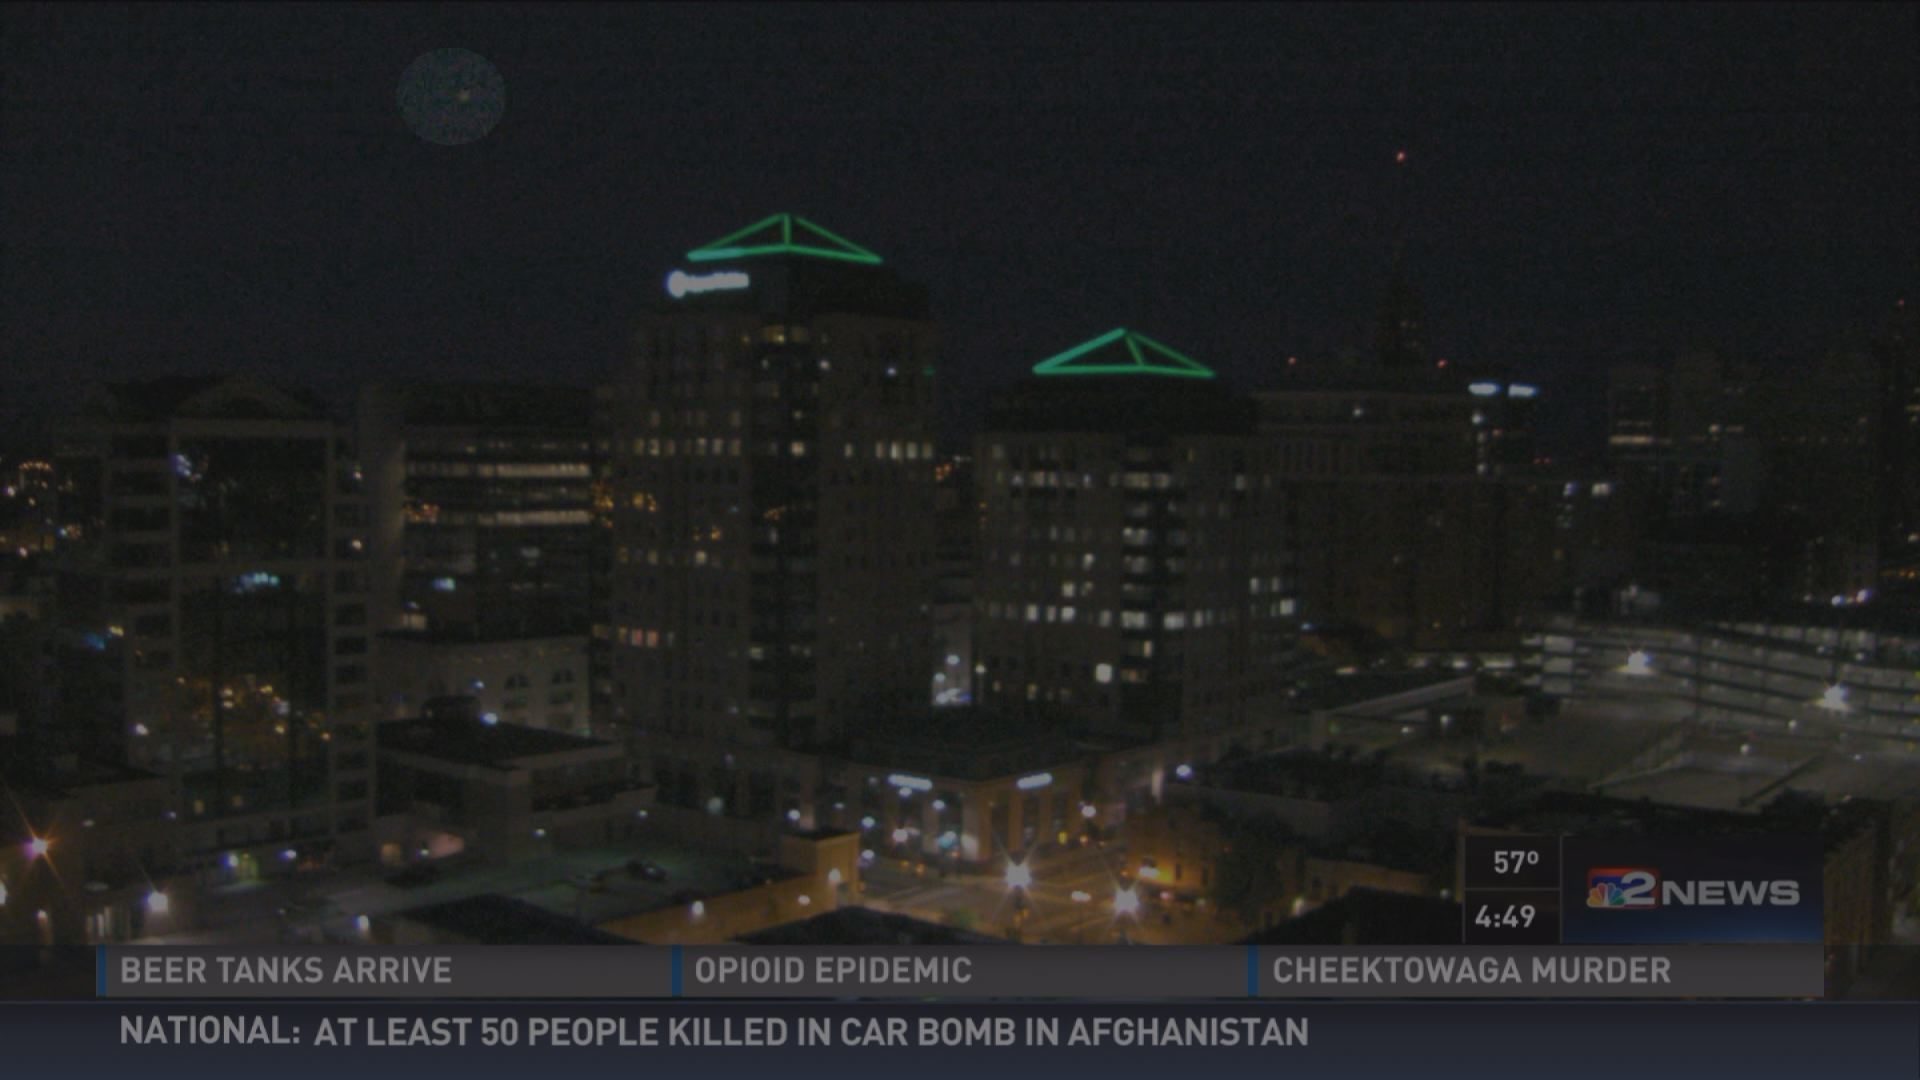 Weather cam catches meteor over downtown Buffalo